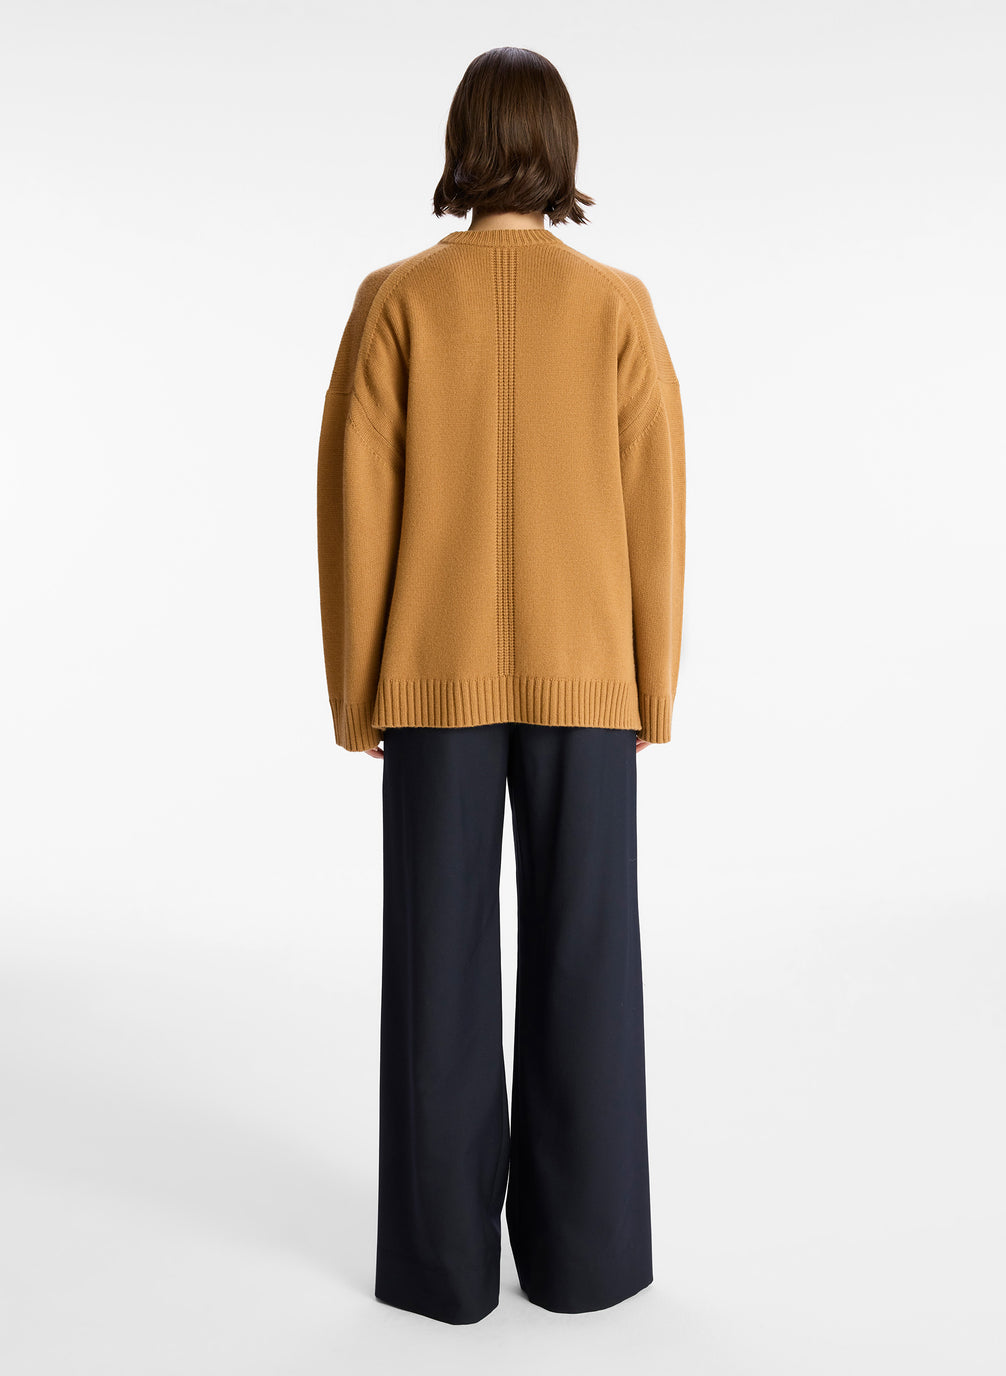 back view of woman wearing tan cashmere long sleeve sweater